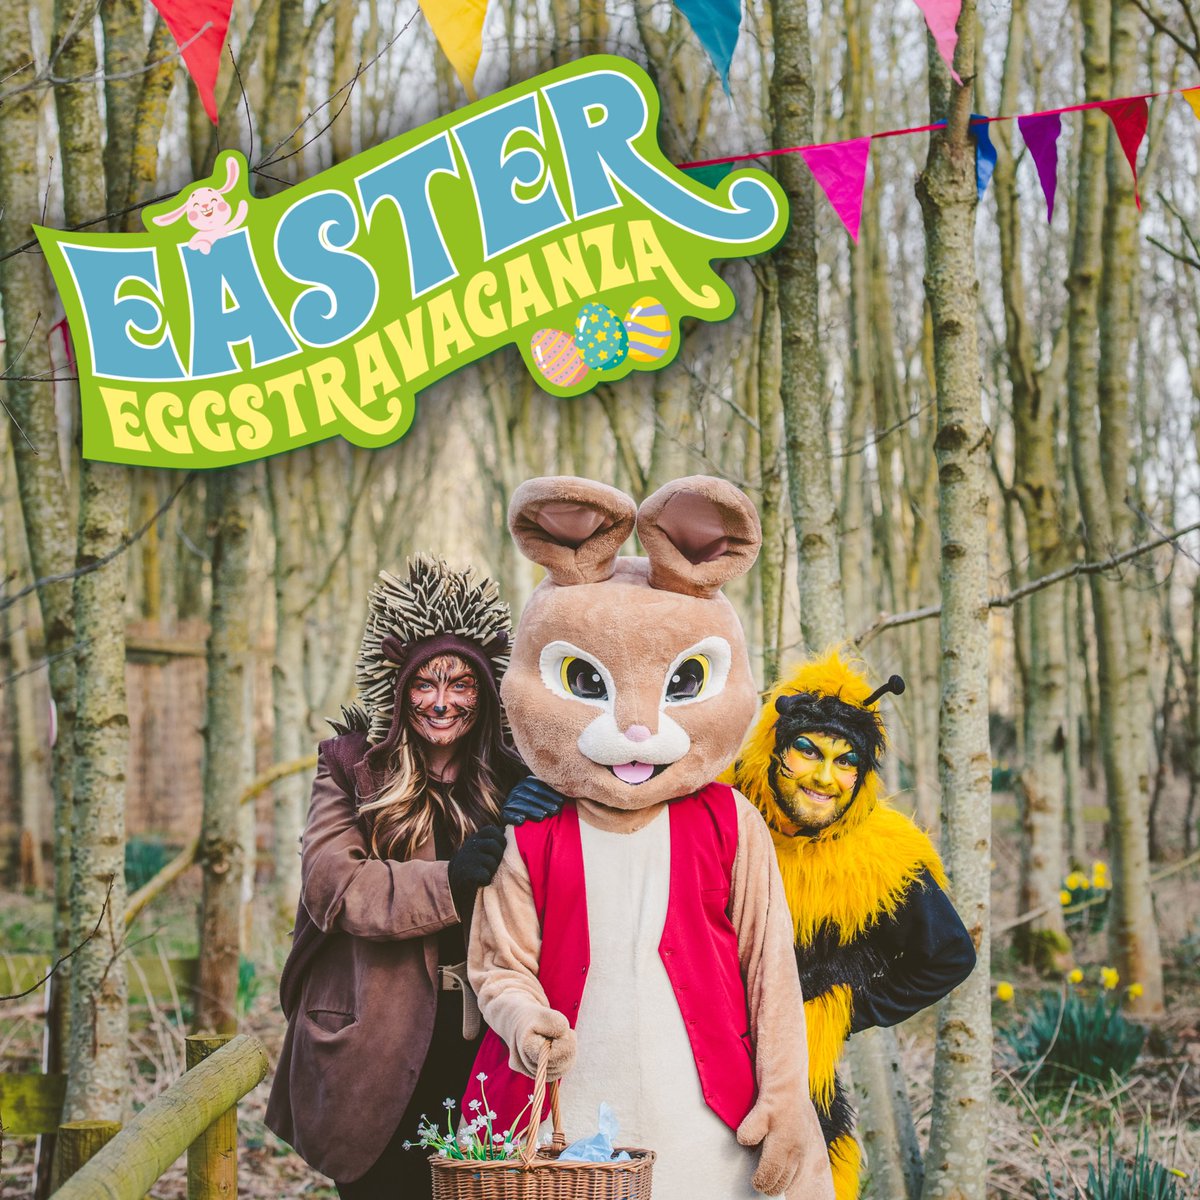 Bunny Woods will be open from SATURDAY! 🐰✨ Come along to meet the Woodland Friends and the Easter Bunny … and of course not forgetting your chocolate treat! 🍫 Join us for bucket loads of Easter fun from 23rd March - 7th April! 🥳 adventurefarm.co.uk